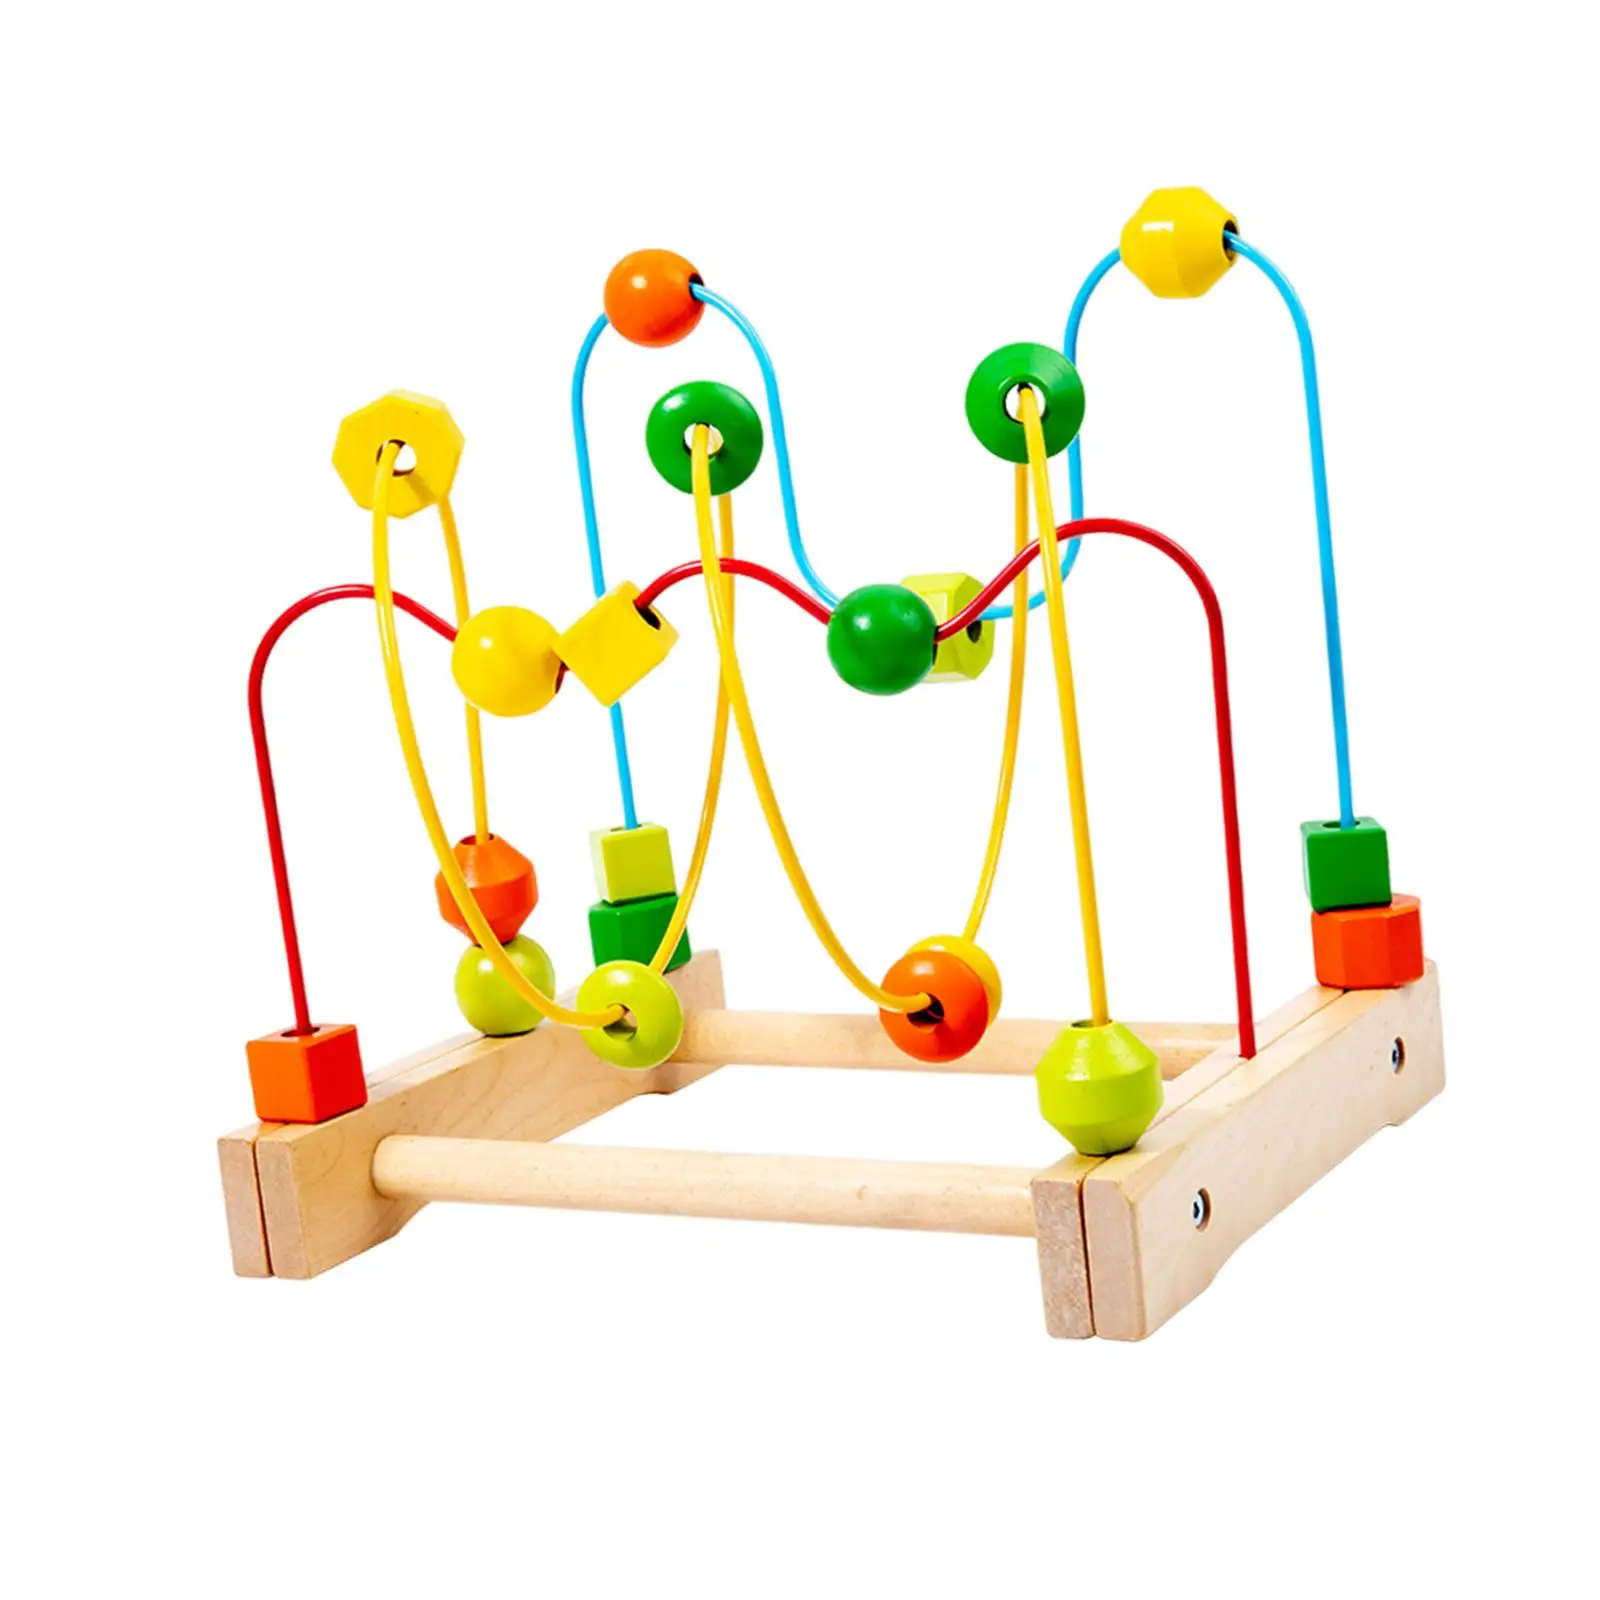 Beaded Toy Grasping Ability Beads Roller Toys Colorful Roller Coaster for